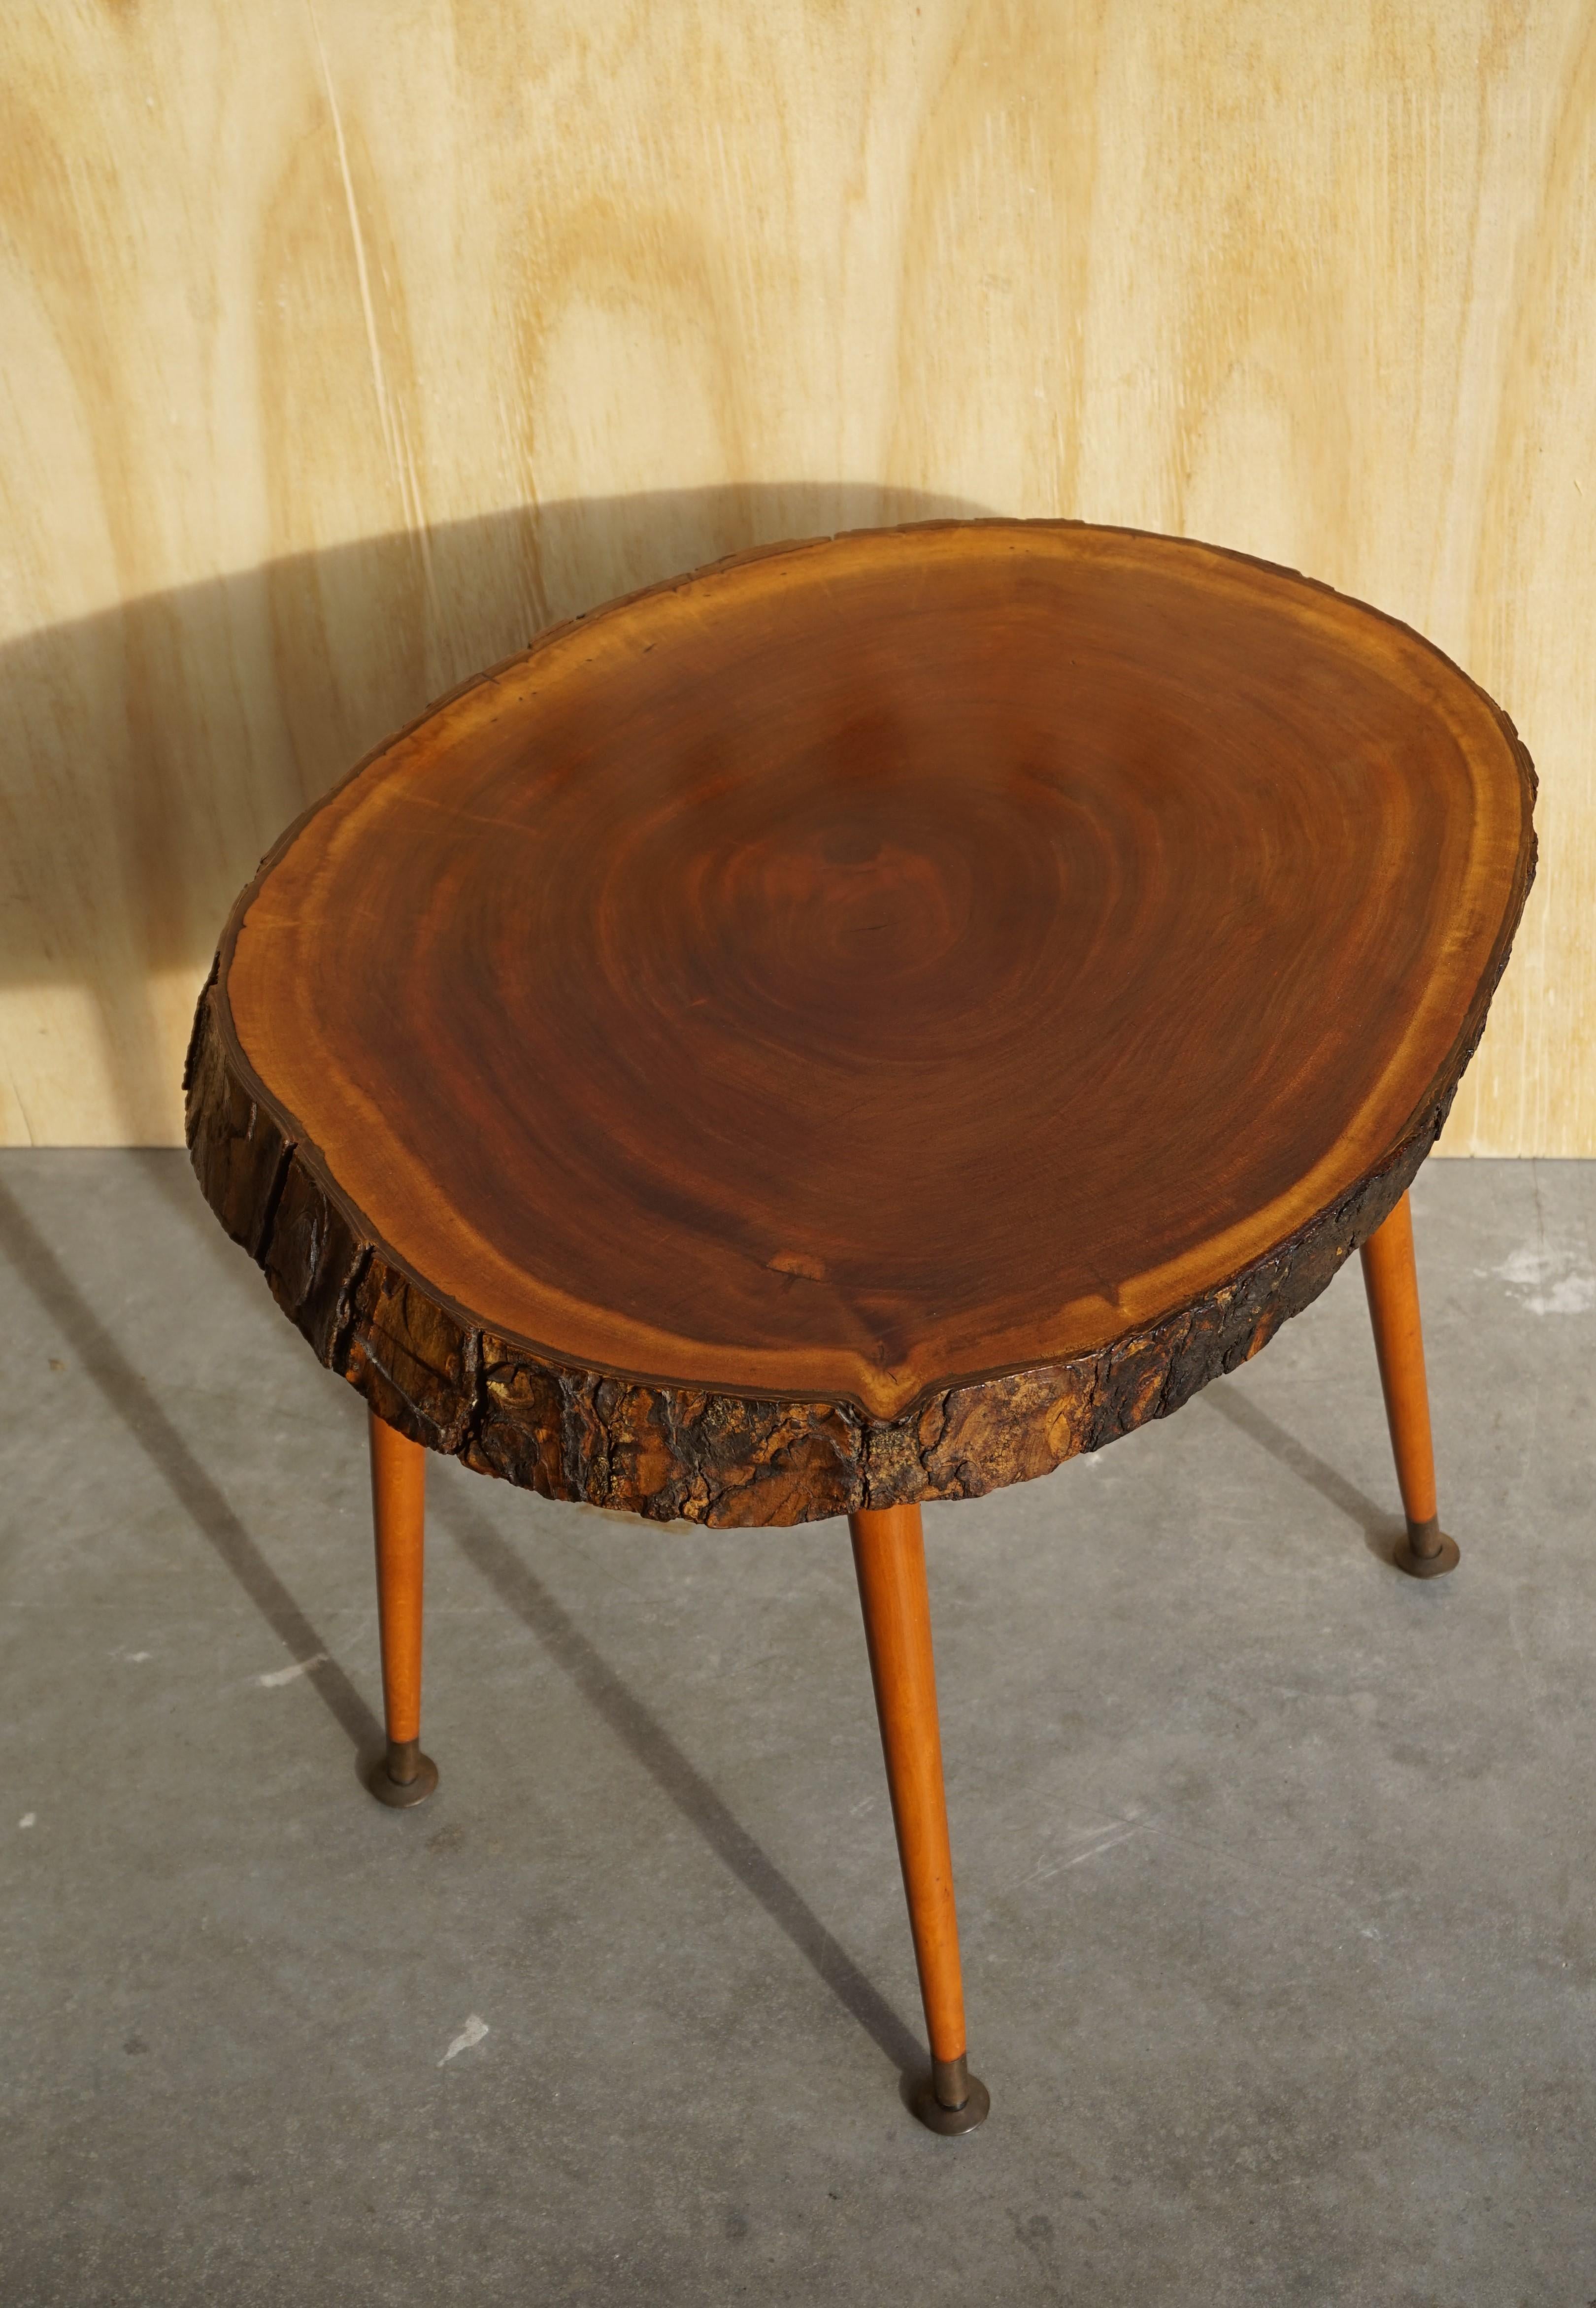 Midcentury Made Organic Modern Wine or End Table with Walnut & Bark Table Top For Sale 8